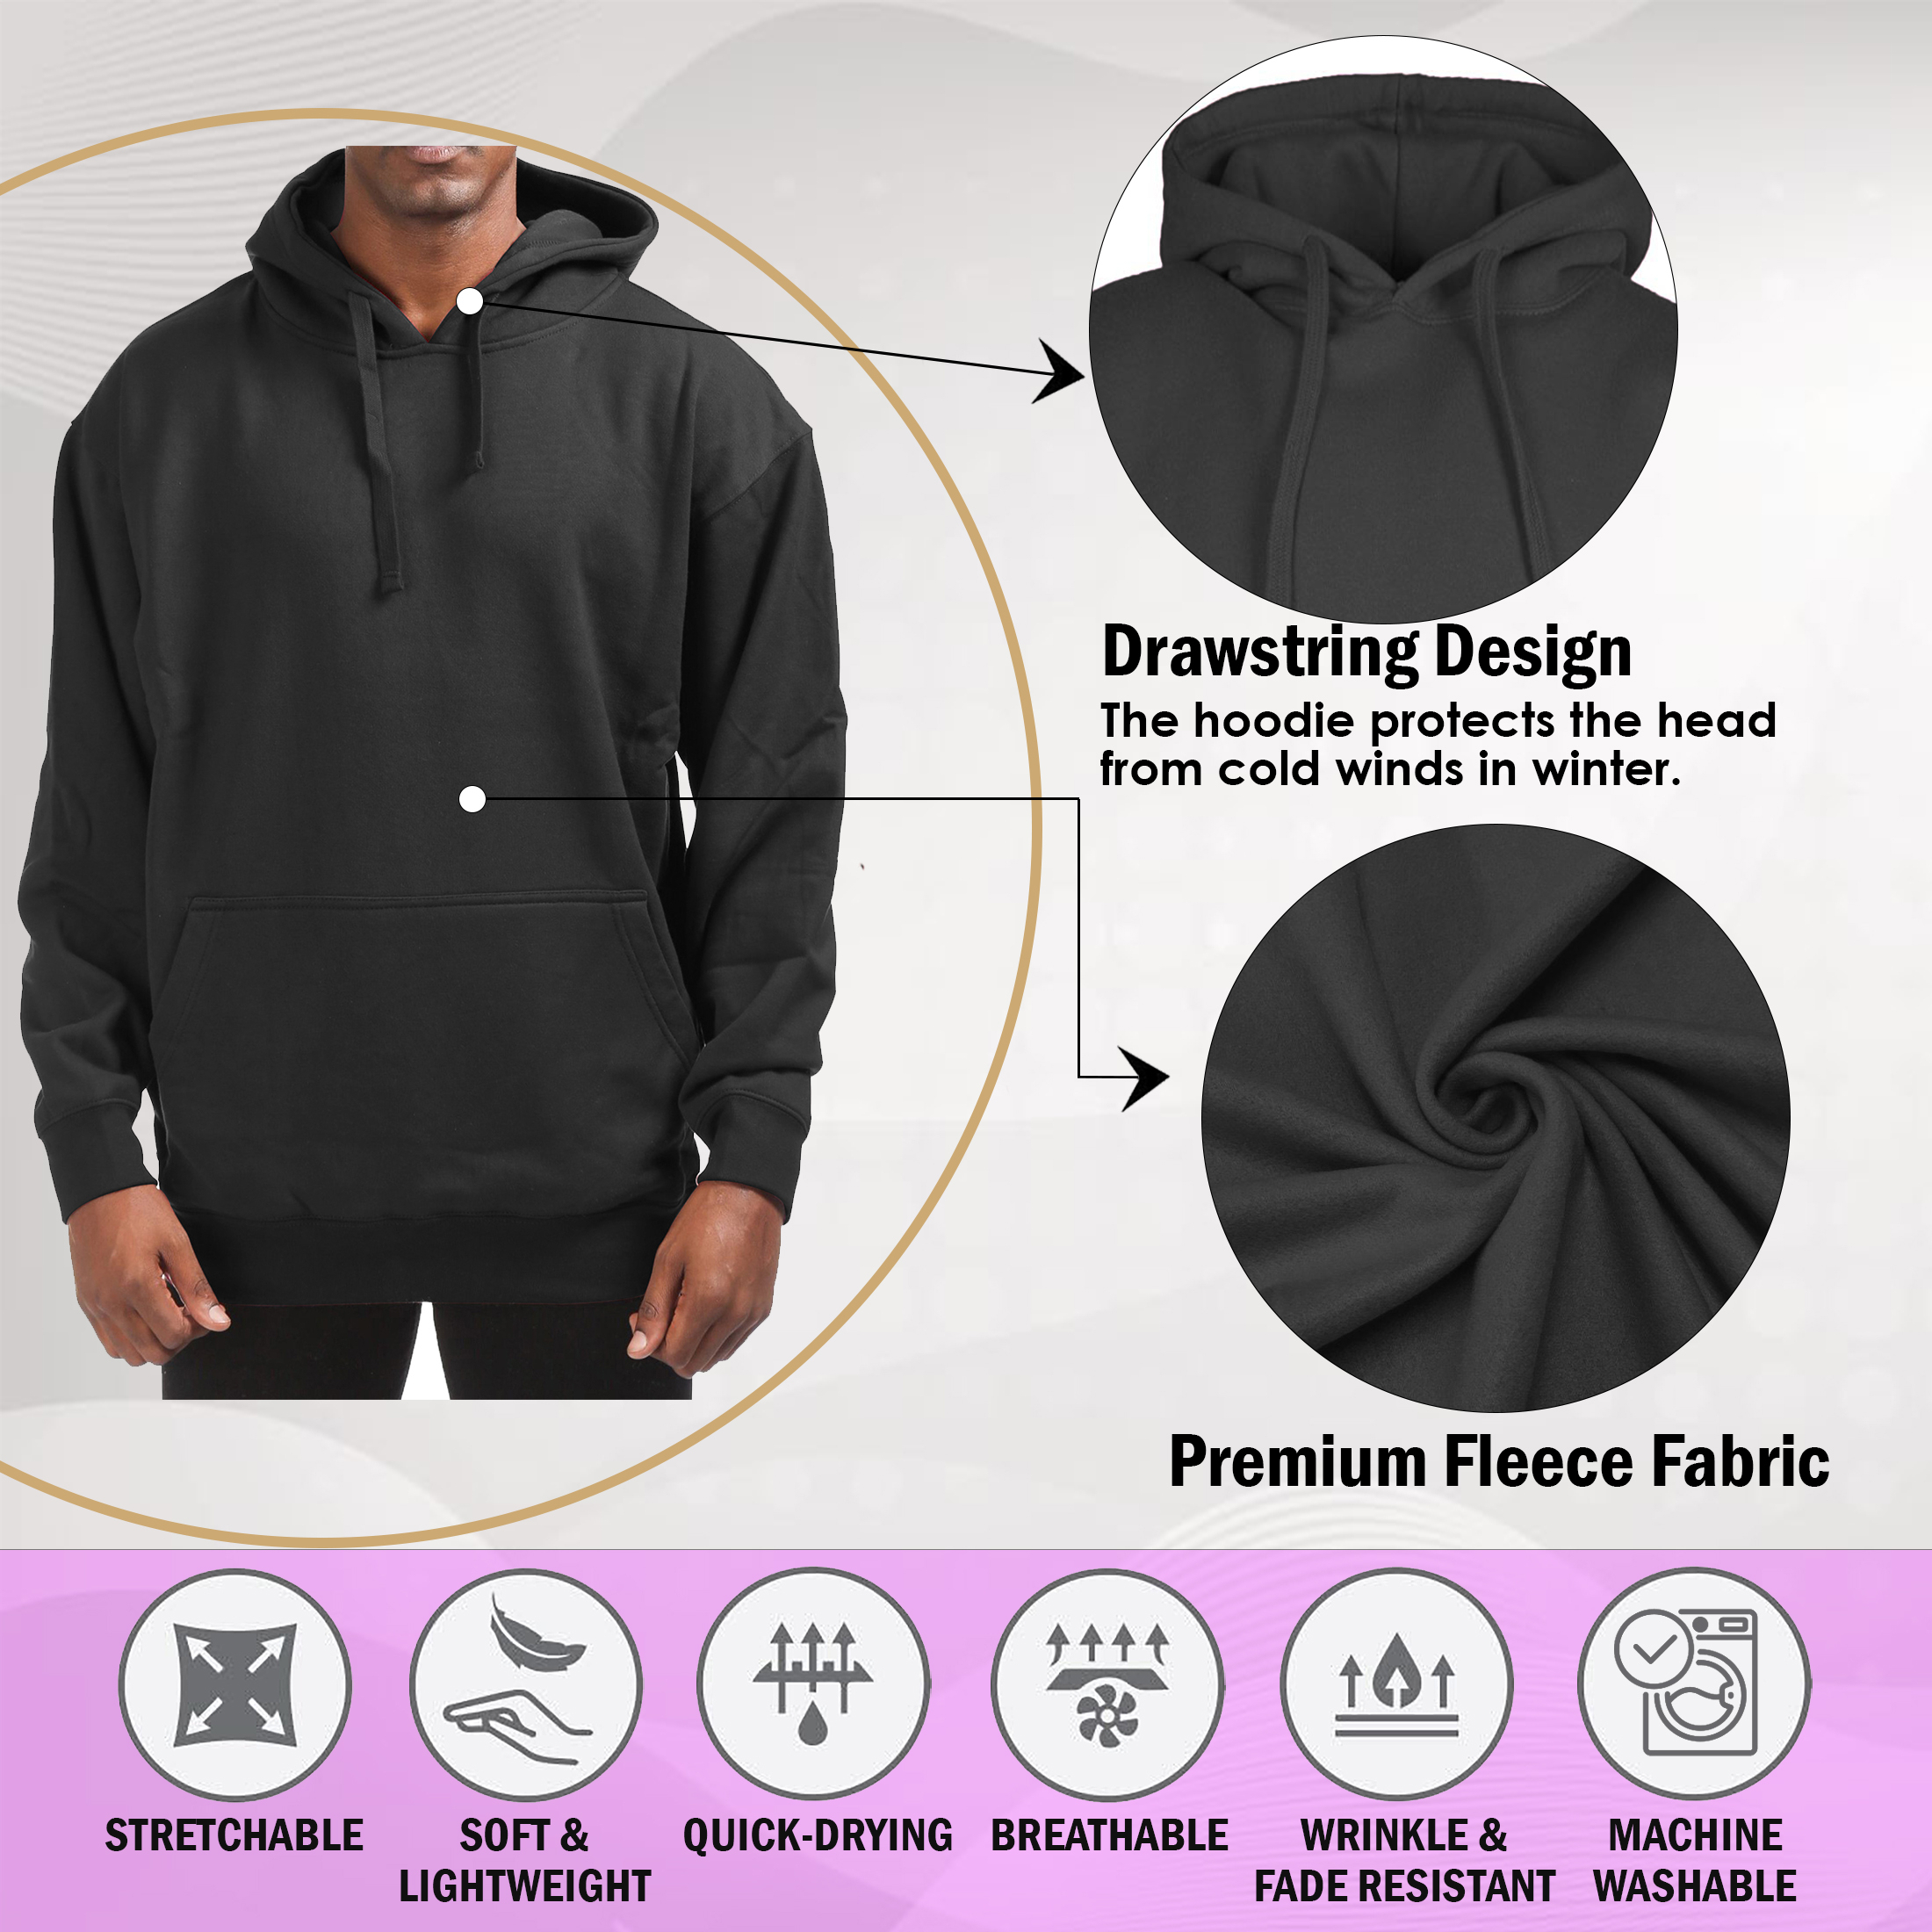 Men's Cotton-Blend Fleece Pullover Hoodie With Pocket (Big & Tall Sizes Available) - Navy, Medium